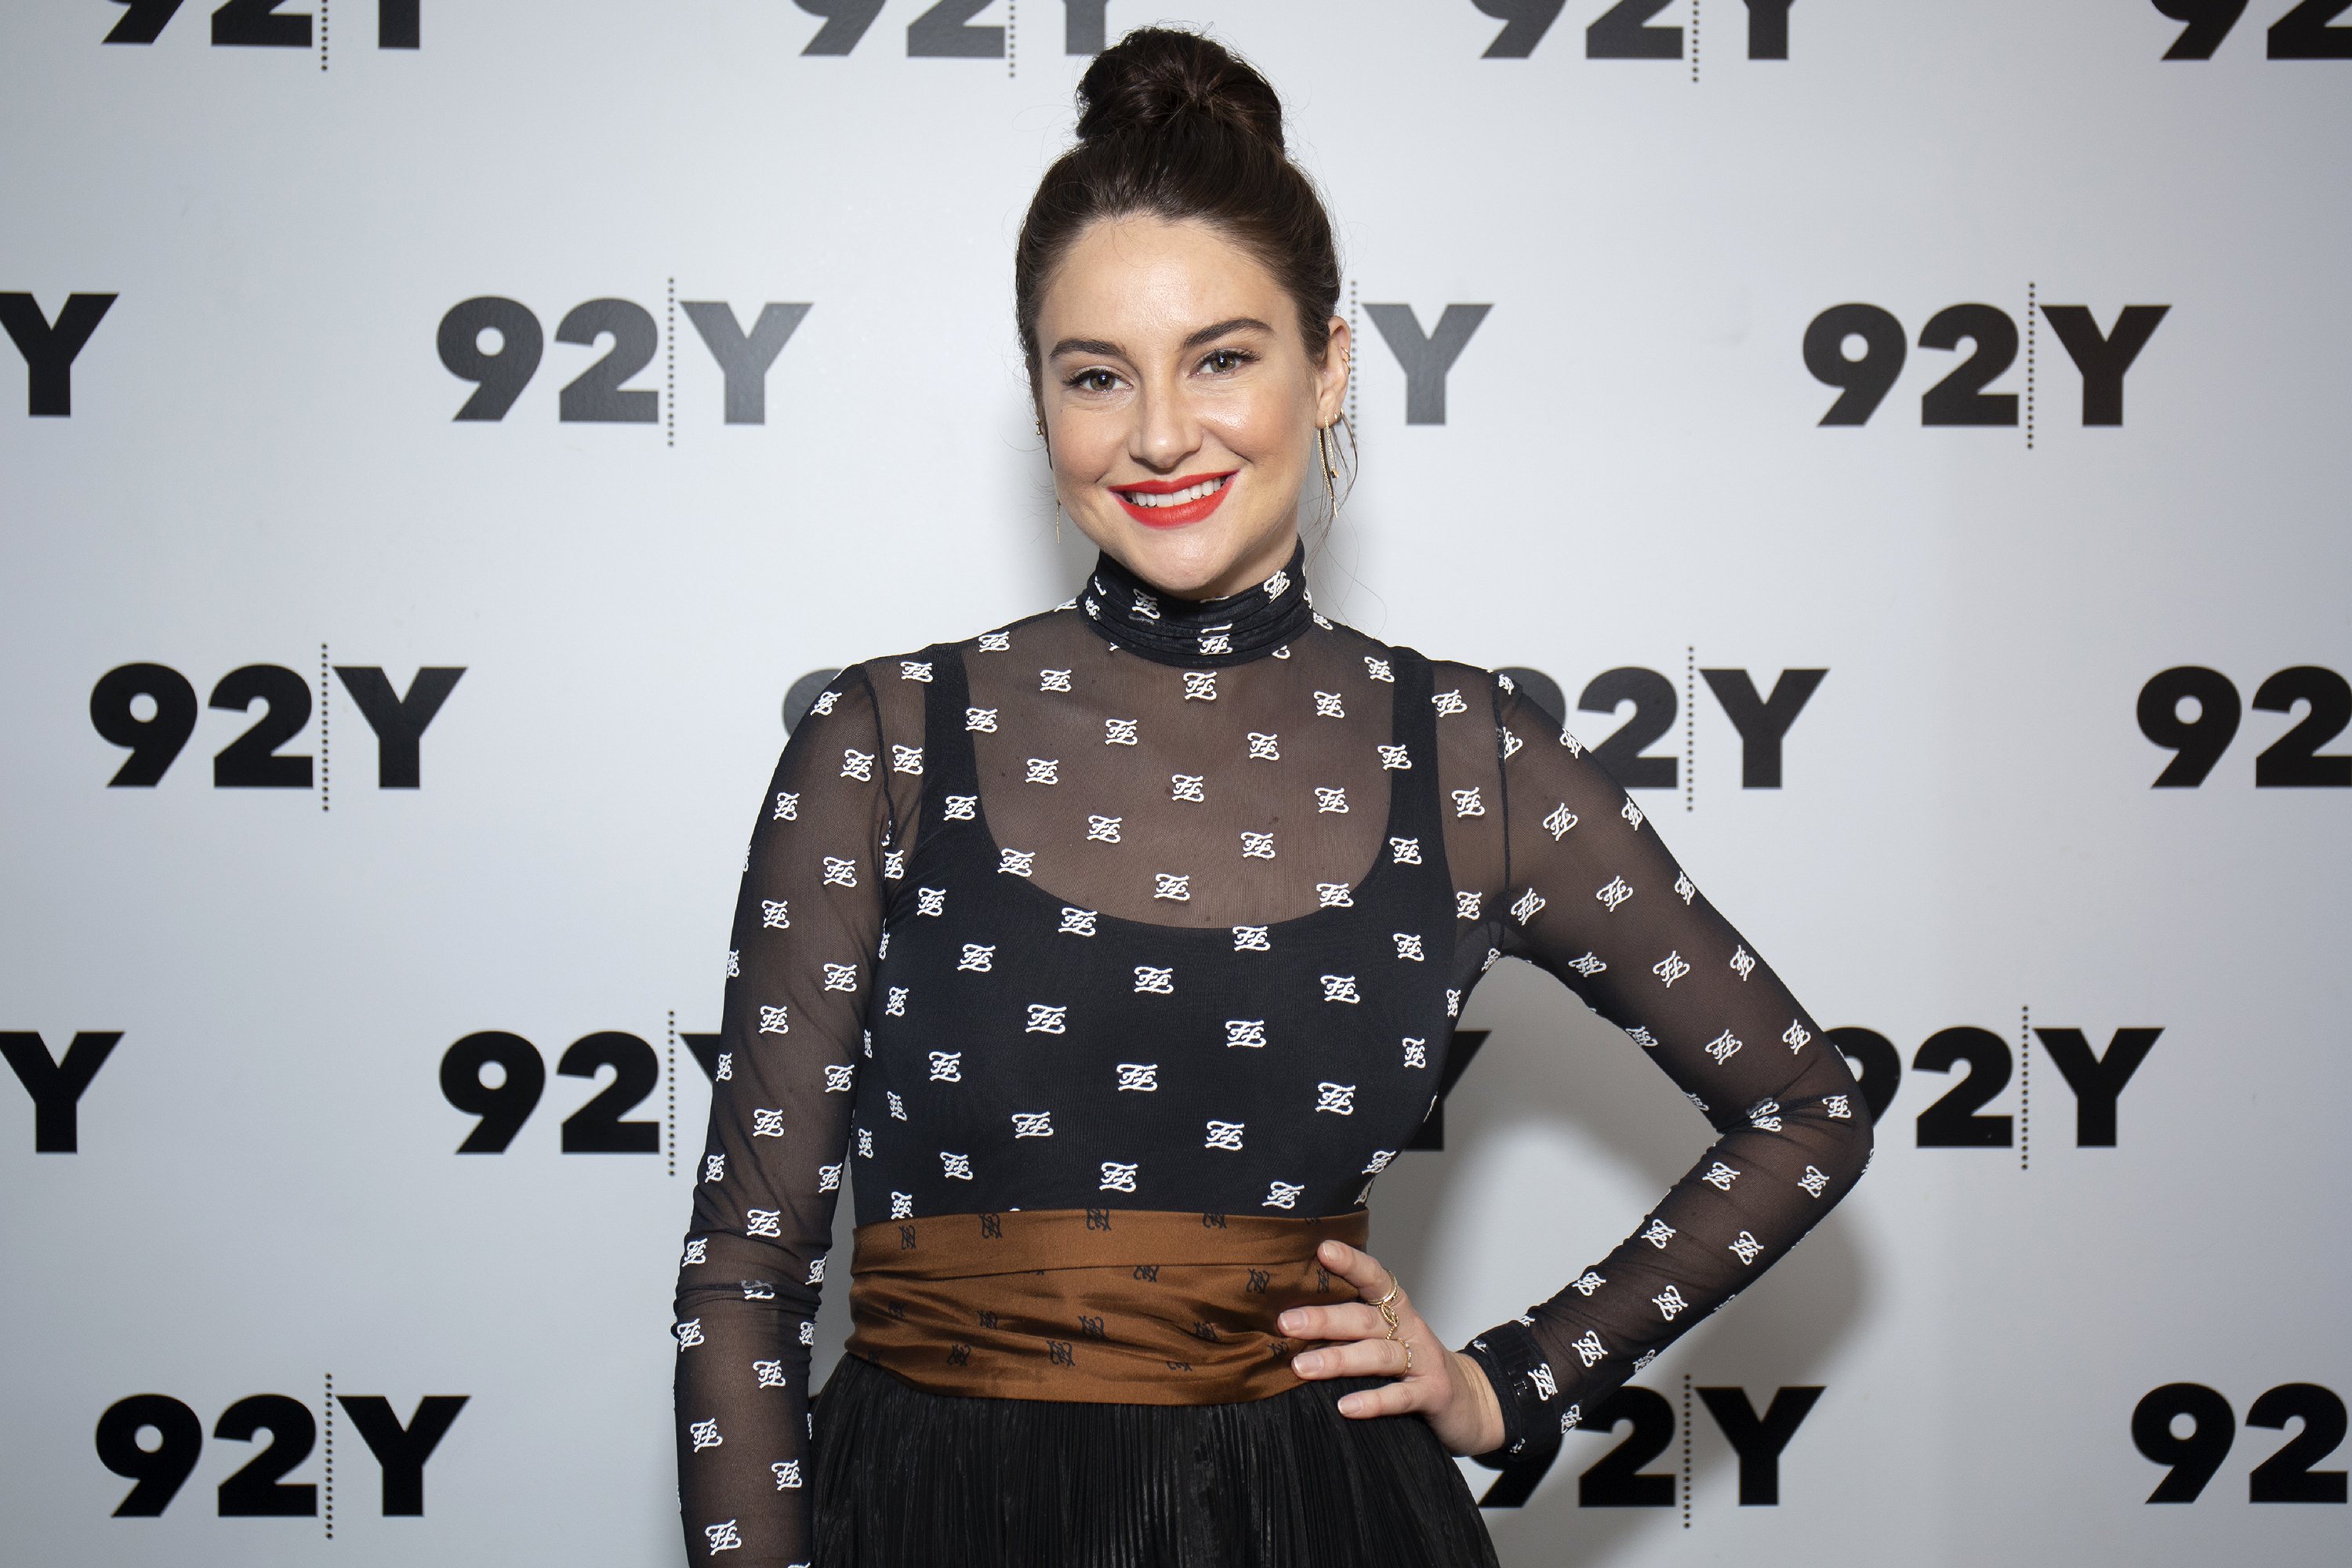 Shailene Woodley at 92nd Street Y on June 10, 2019 in New York City | Photo: Getty Images